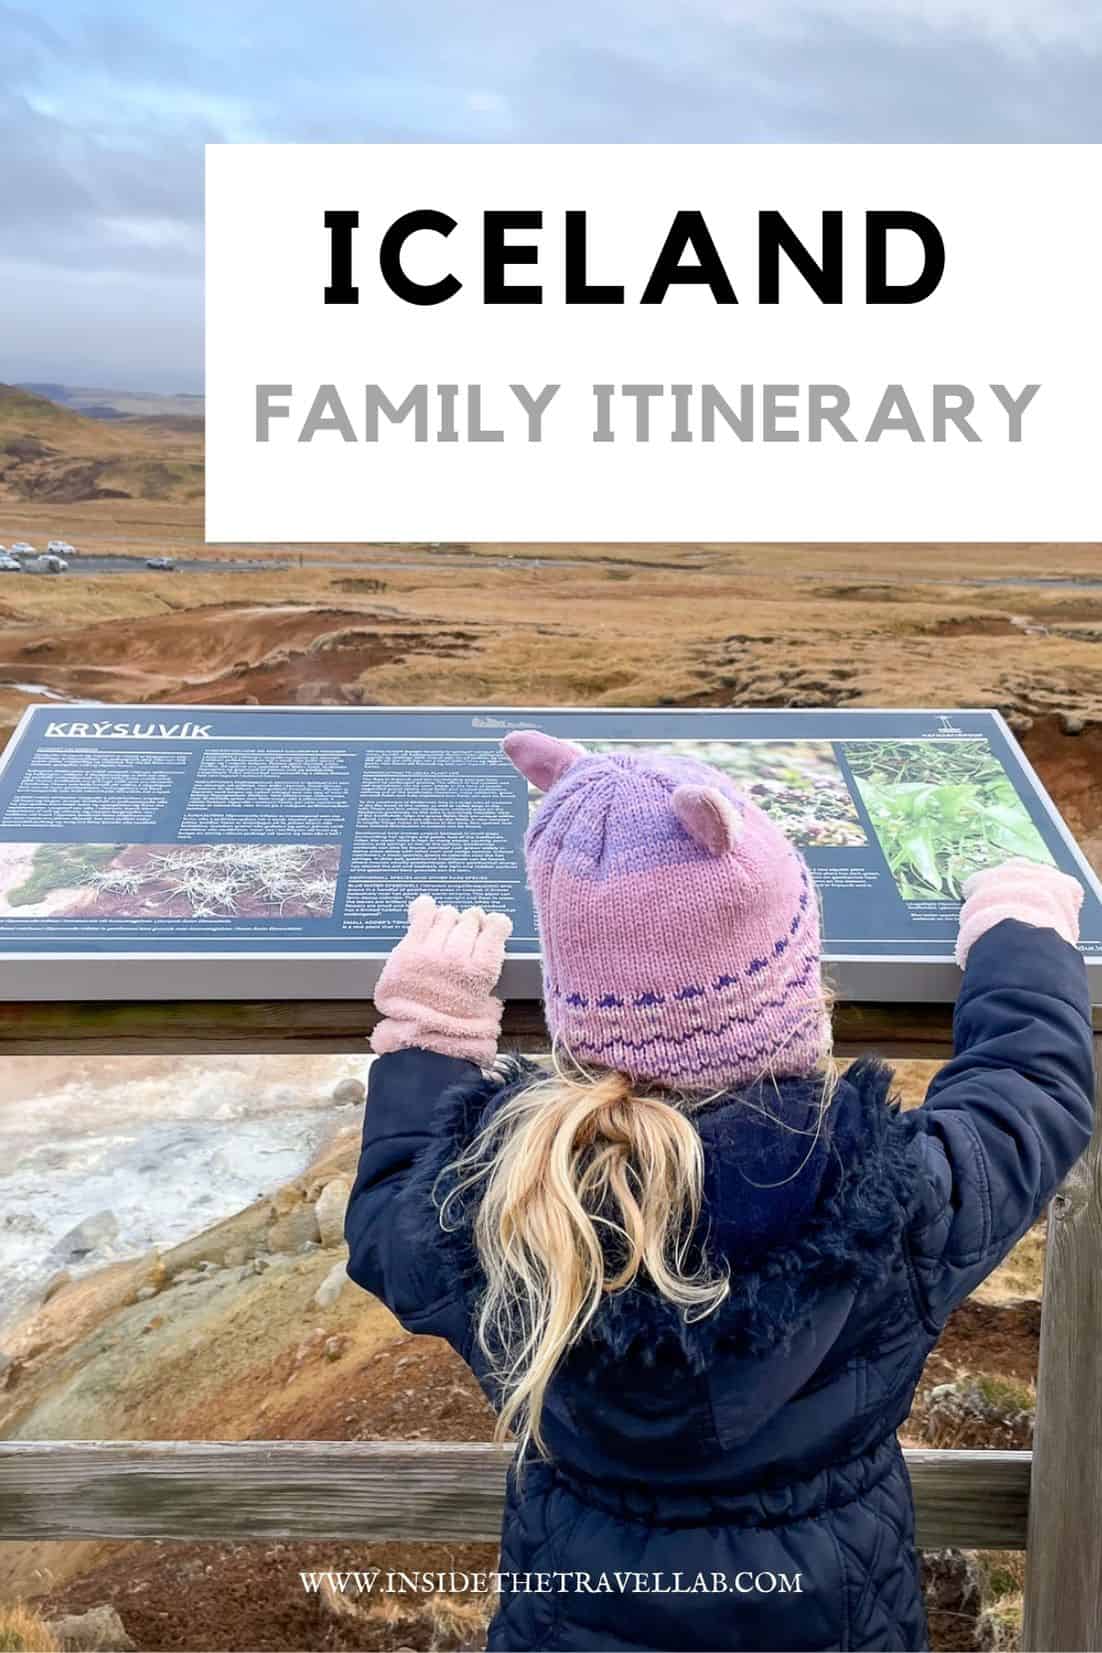 Iceland family itinerary cover image for Pinterest